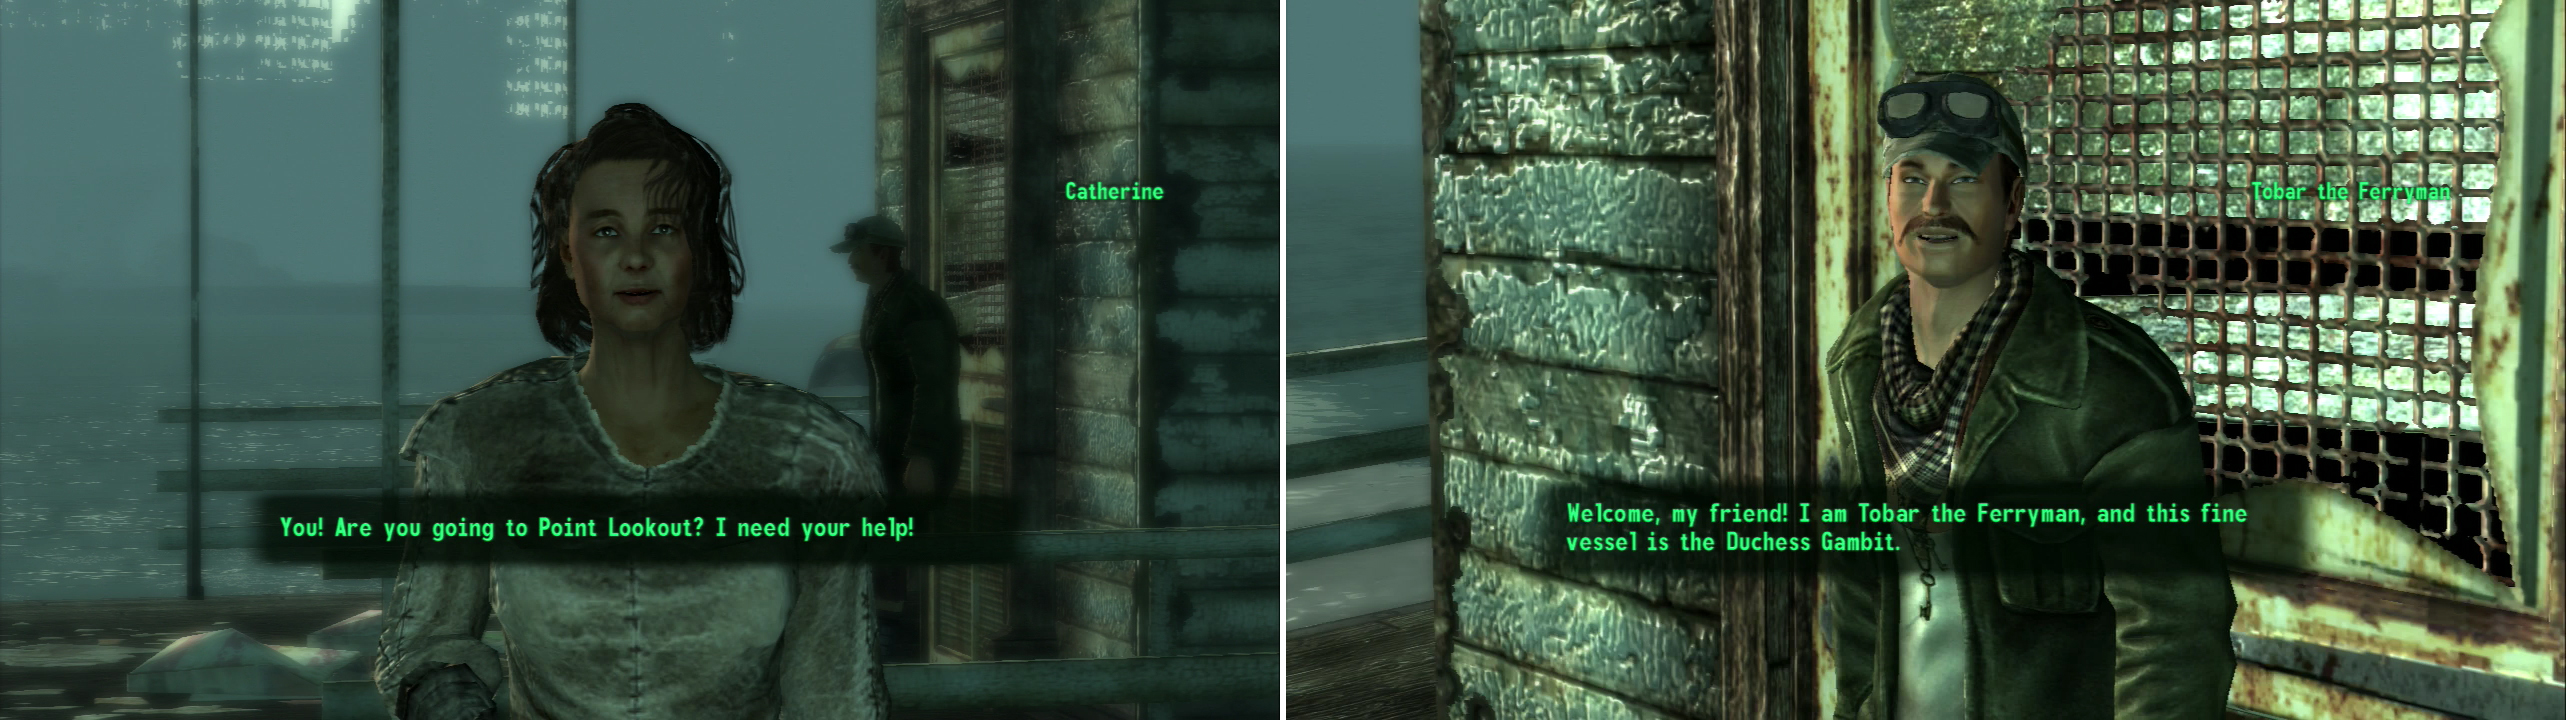 Catherine's over-adventurous daughter has gone missing, and she's willing to appeal to any stranger for aid (left). Tobar will take you between Point Lookout and the Capital Wasteland… for a price (right0.